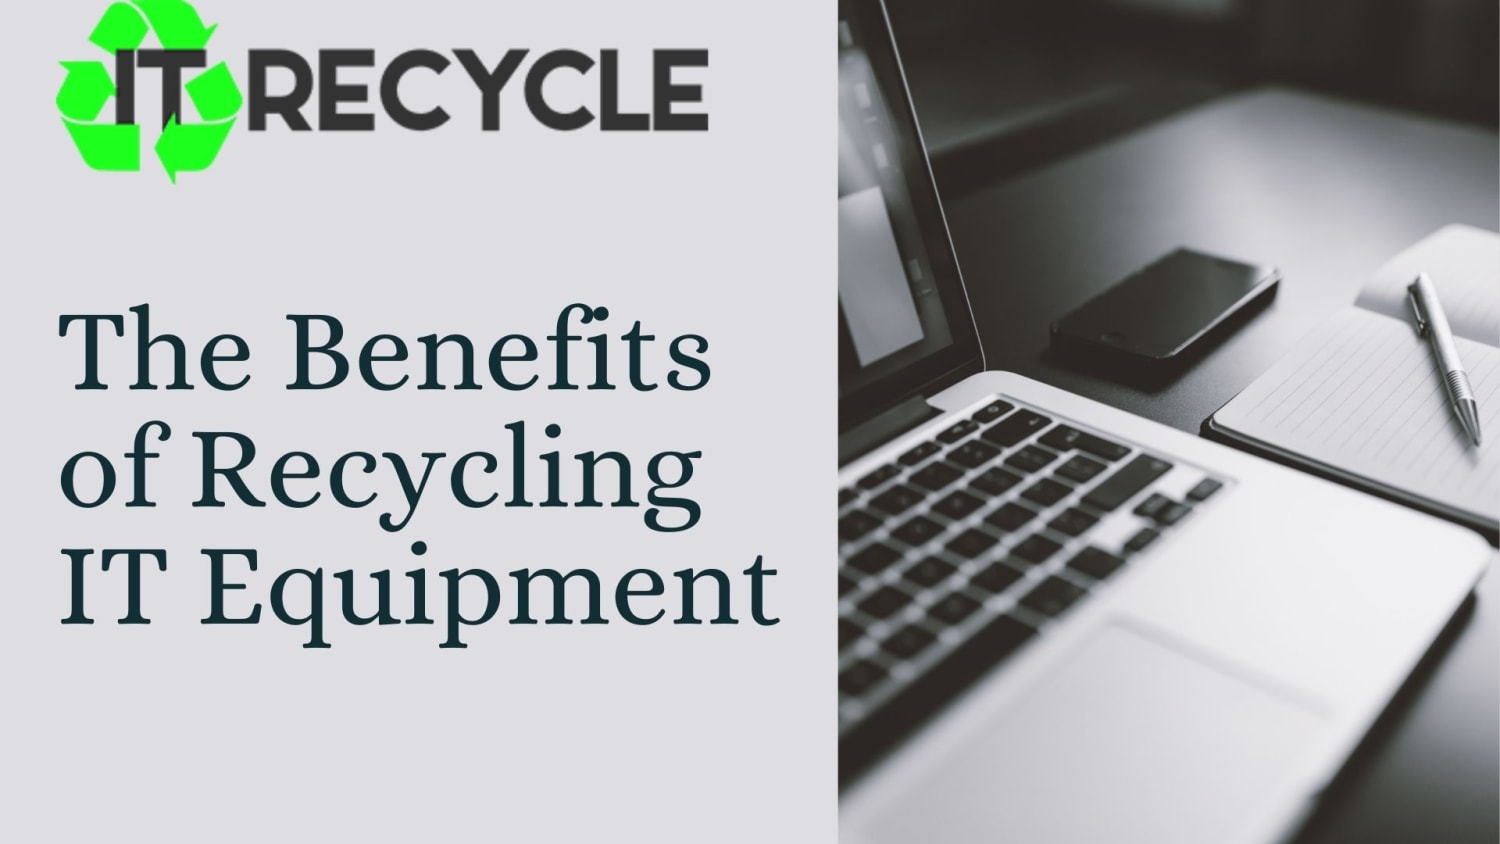 The Benefits of Recycling IT Equipment - IT Recycle